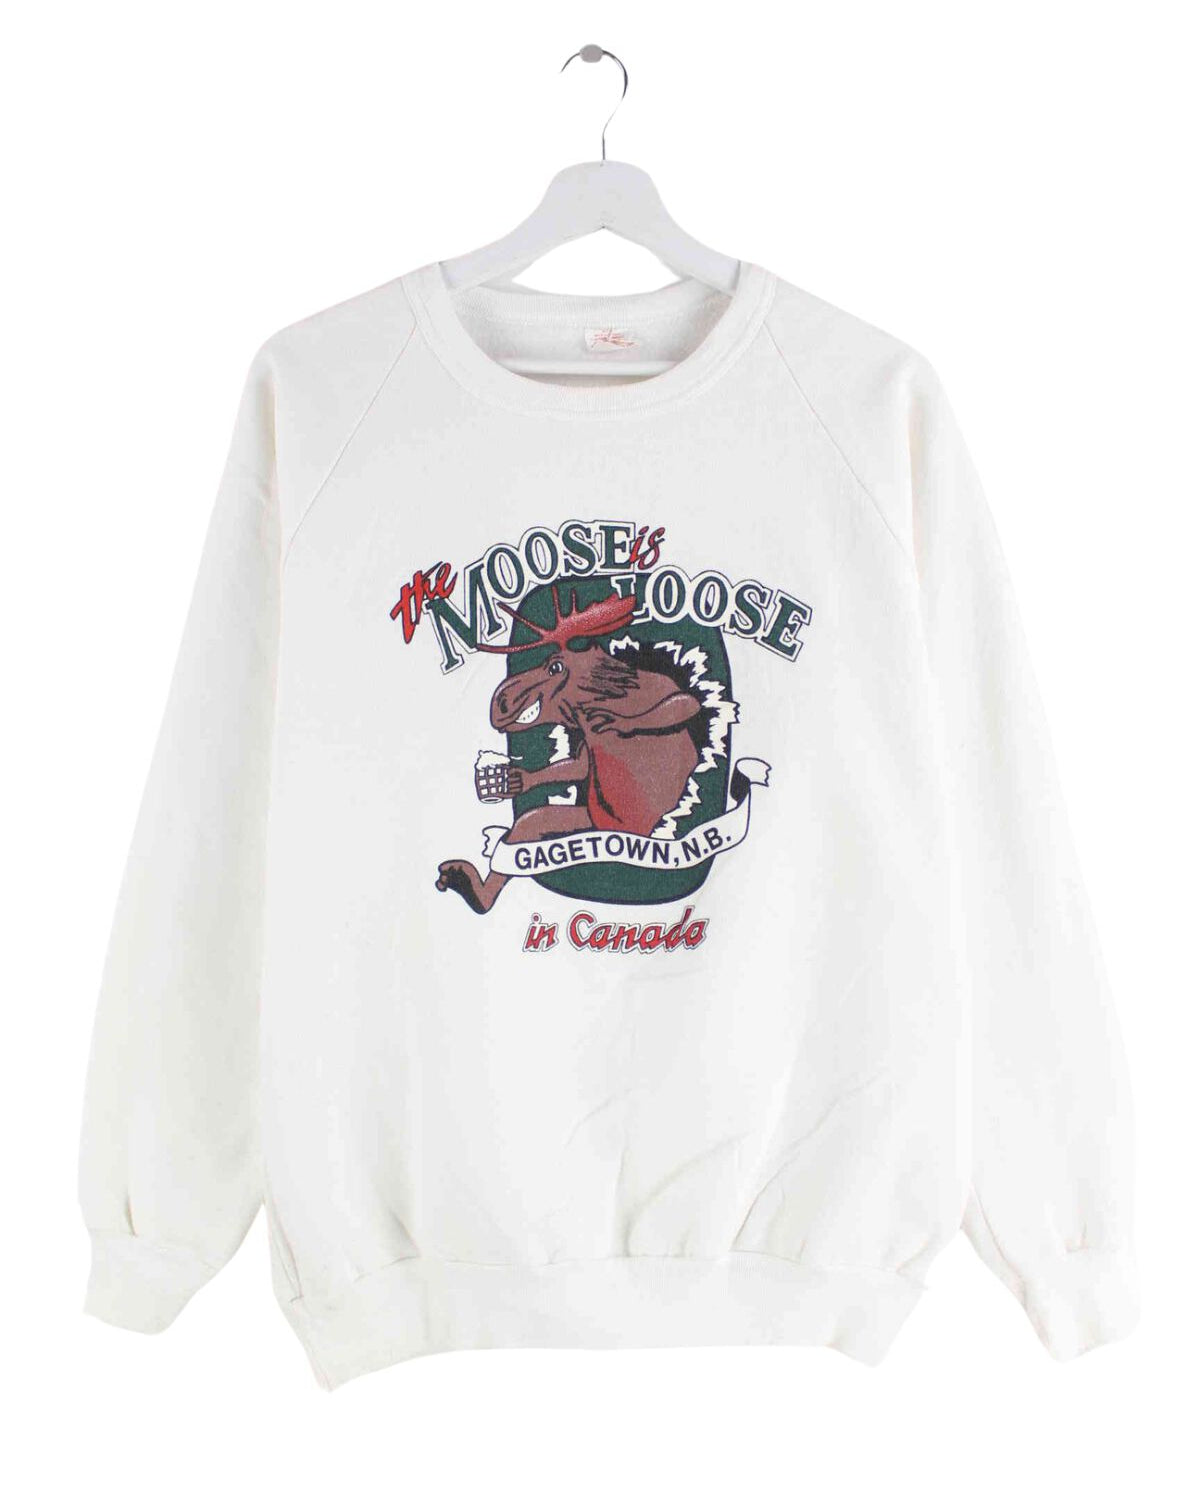 Vintage 90s Moose Canada Print Sweater Weiß M (front image)